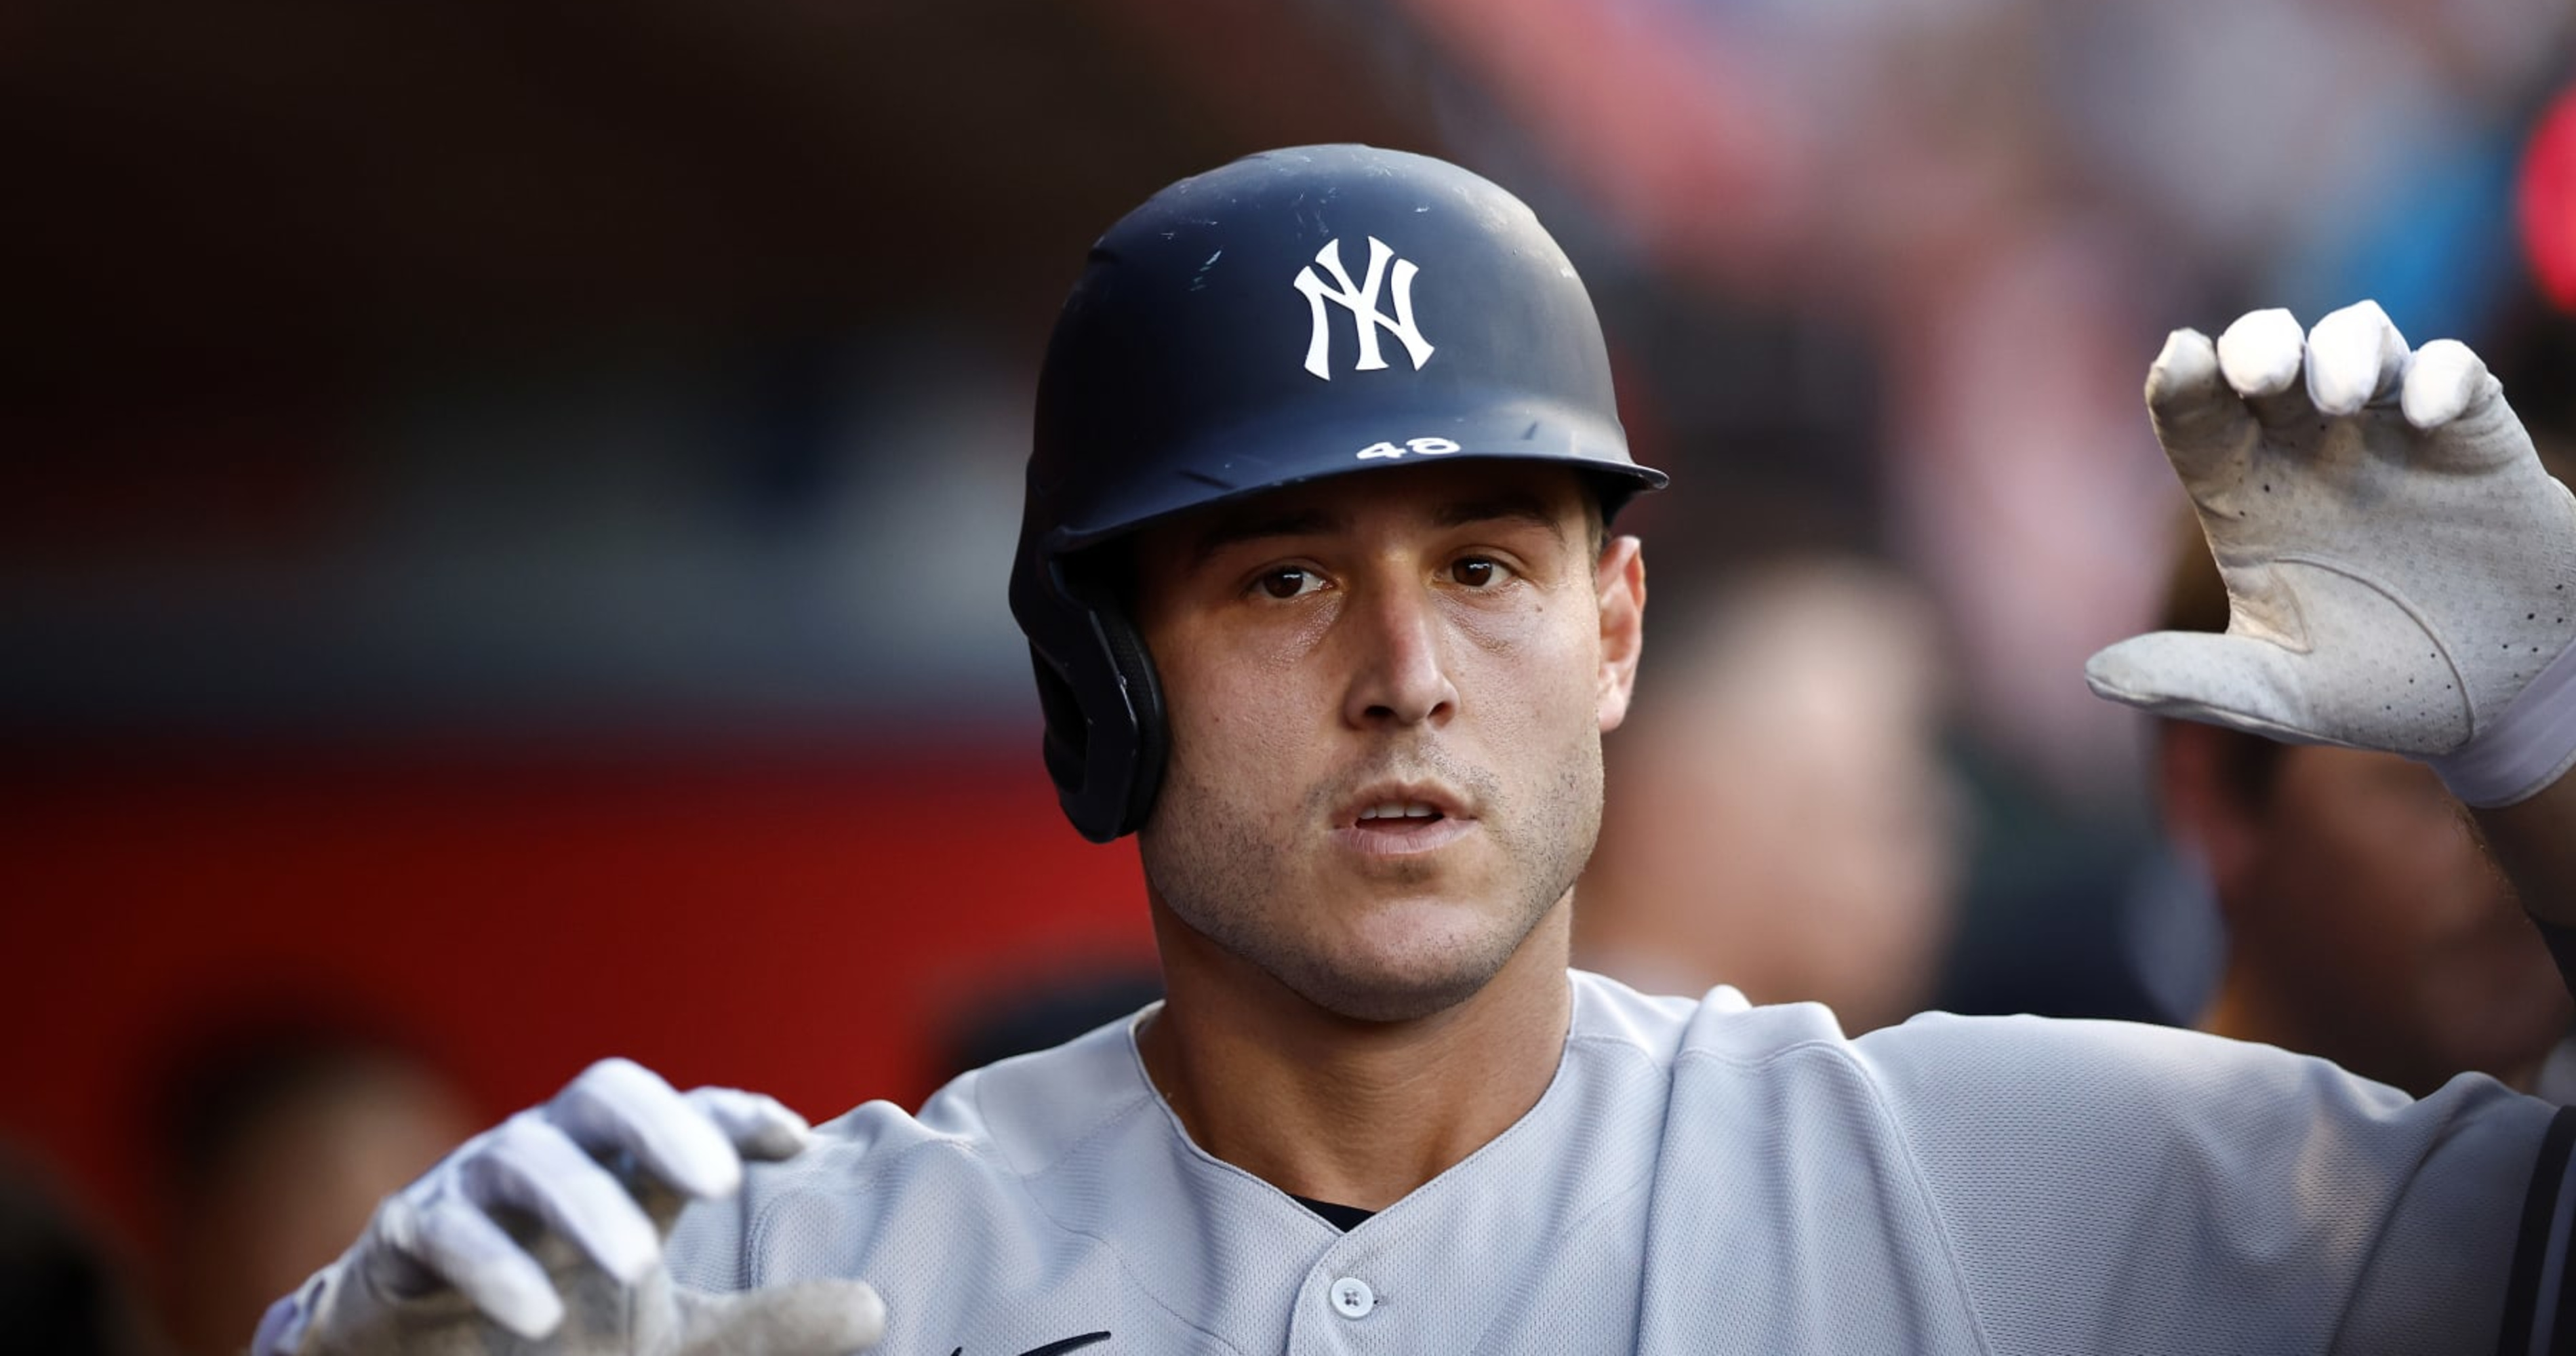 After Yankees' Anthony Rizzo opts to stay in Bronx, he lobbies for